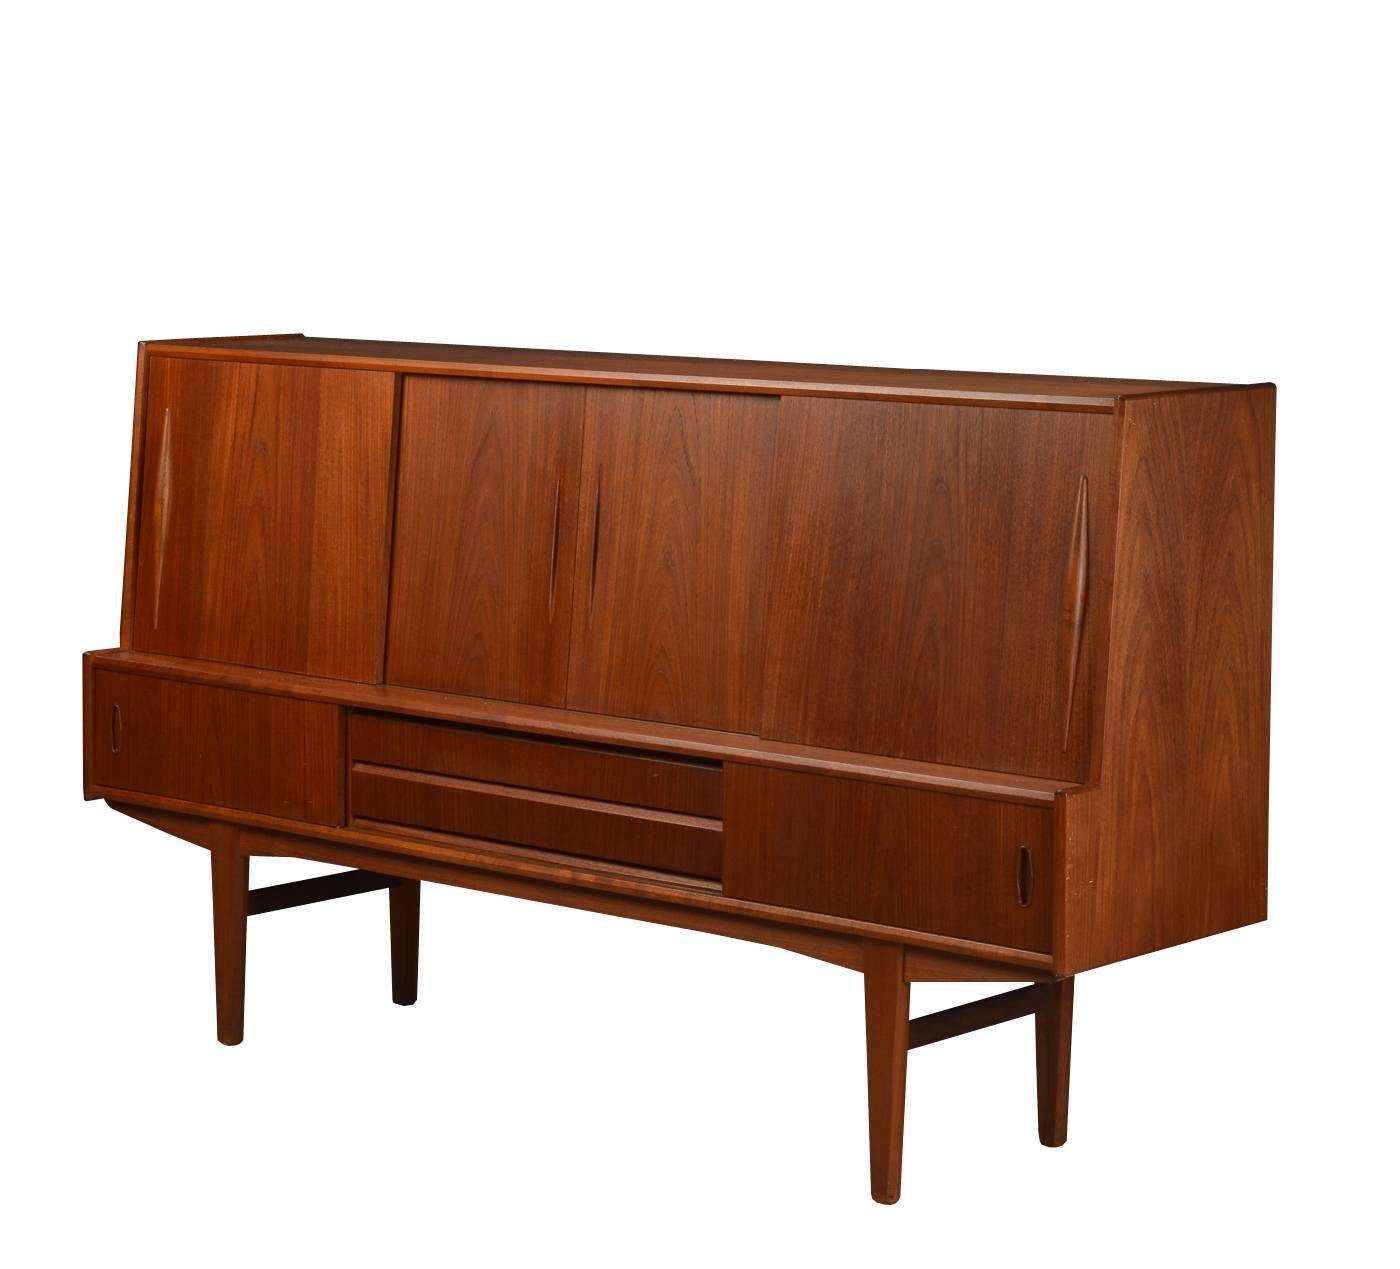 Mid-Century Modern sideboard in teak, Denmark, 1960s. Has front sliding doors, drawers and interior bar storage with mirror and shelves. Marks on top. Overall in good vintage condition.